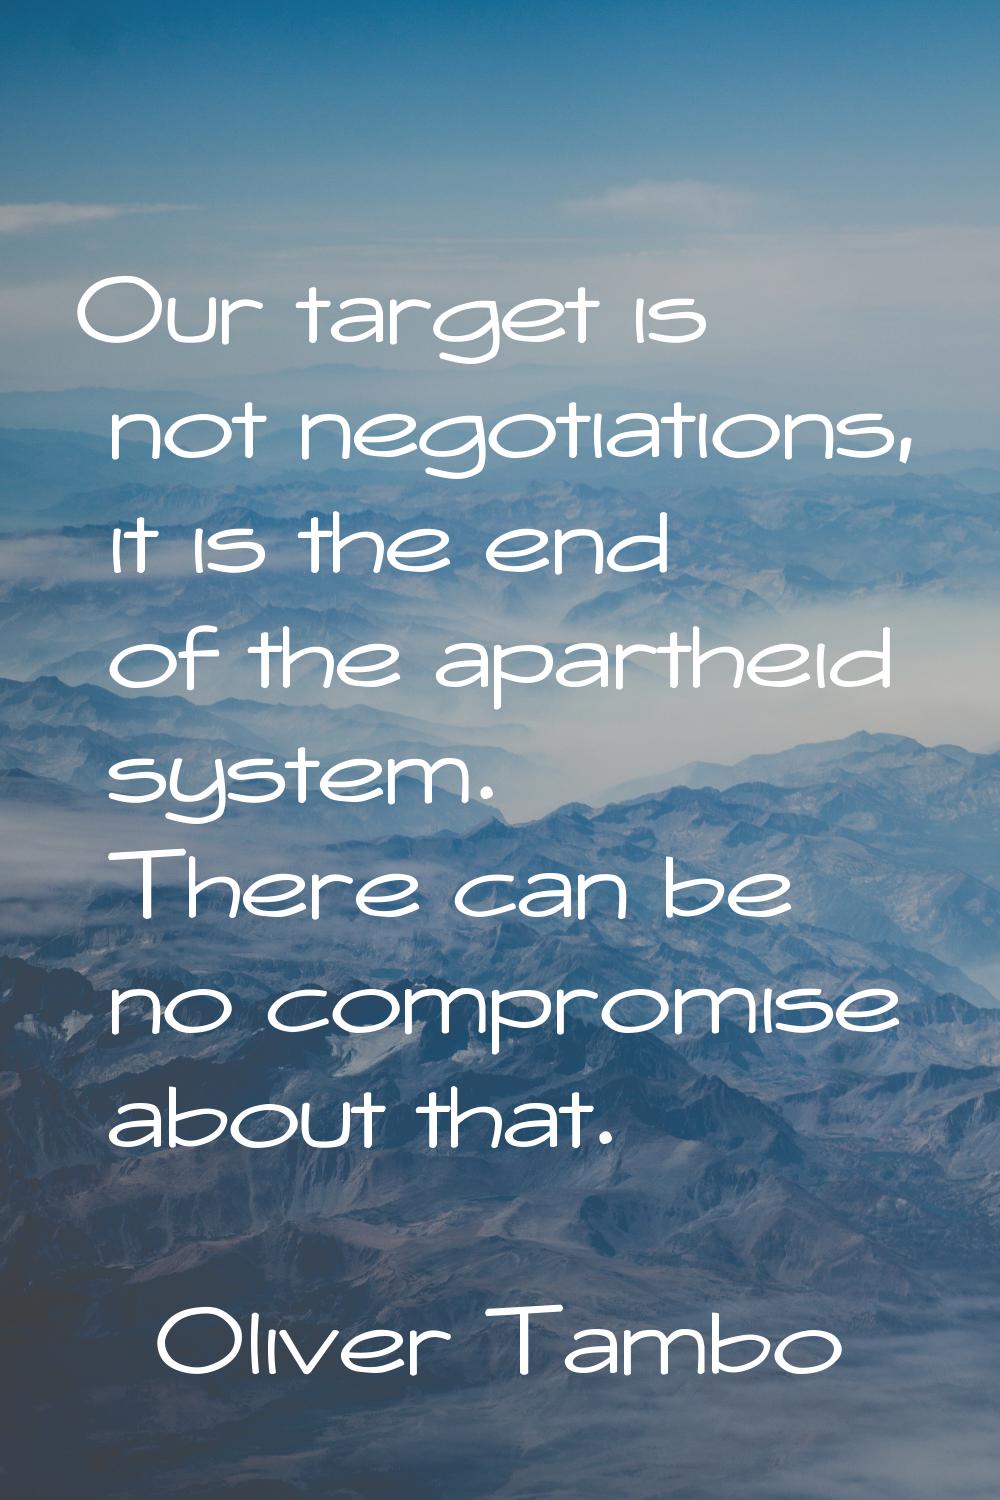 Our target is not negotiations, it is the end of the apartheid system. There can be no compromise a